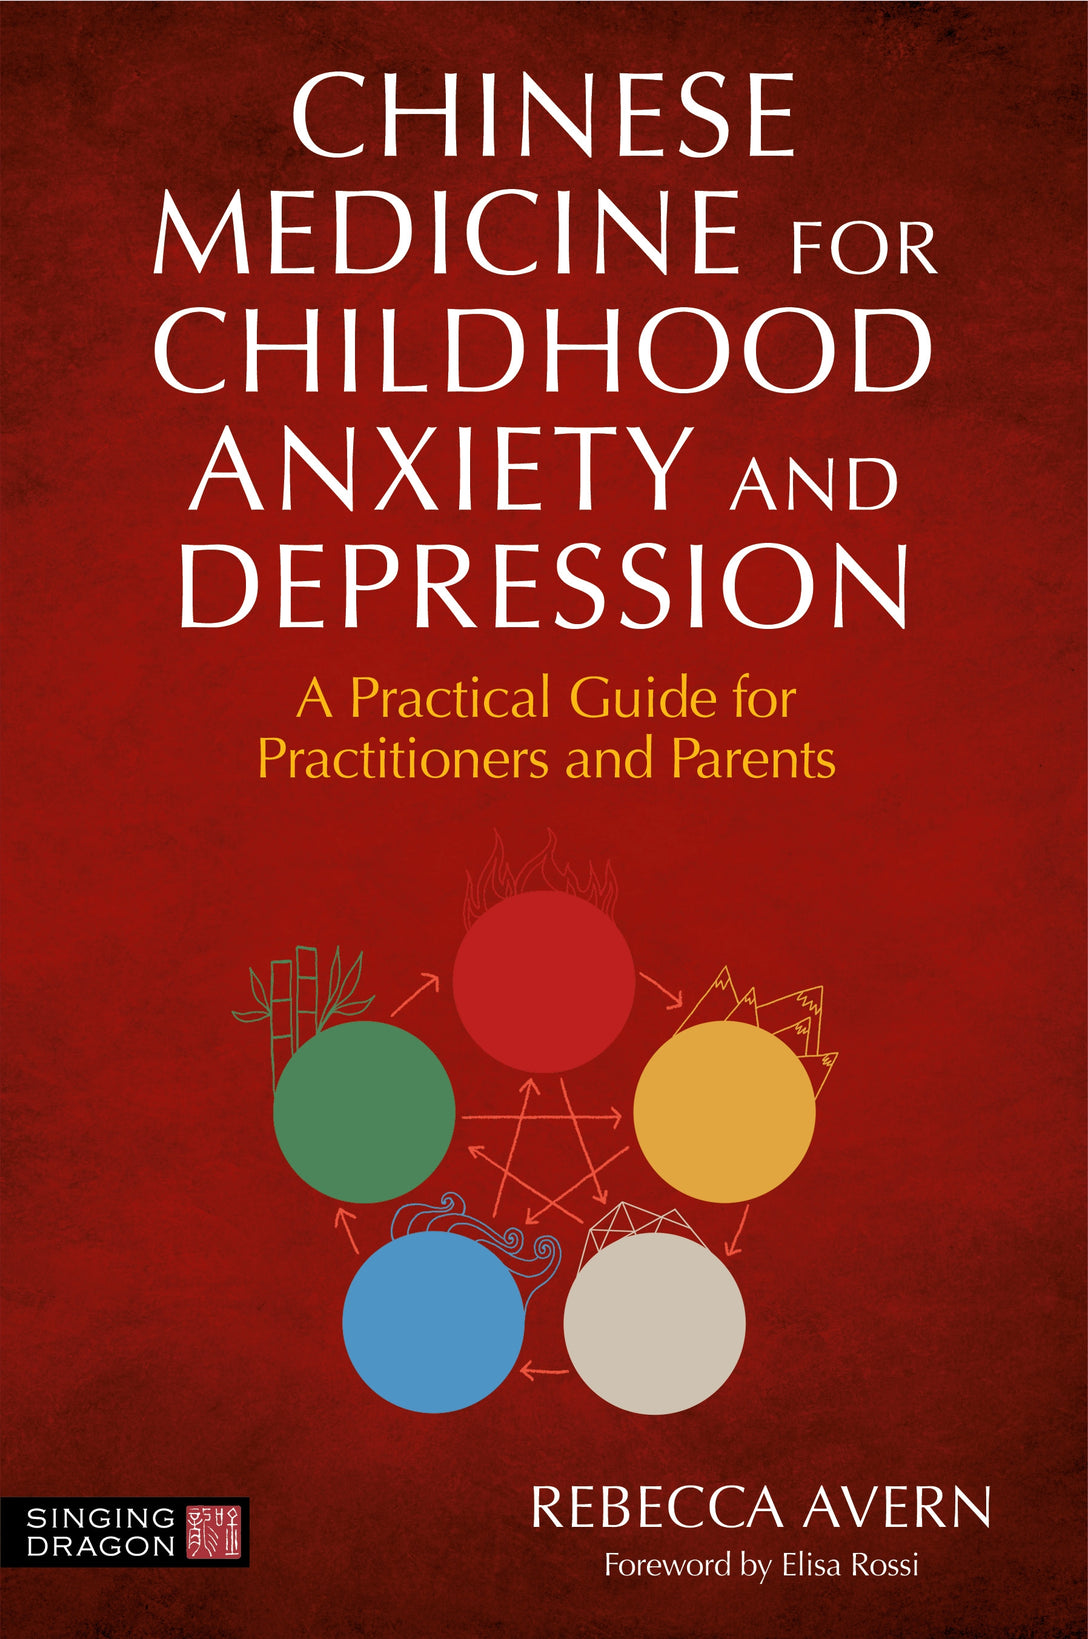 Chinese Medicine for Childhood Anxiety and Depression by Rebecca Avern, Elisa Rossi, Sarah Hoyle